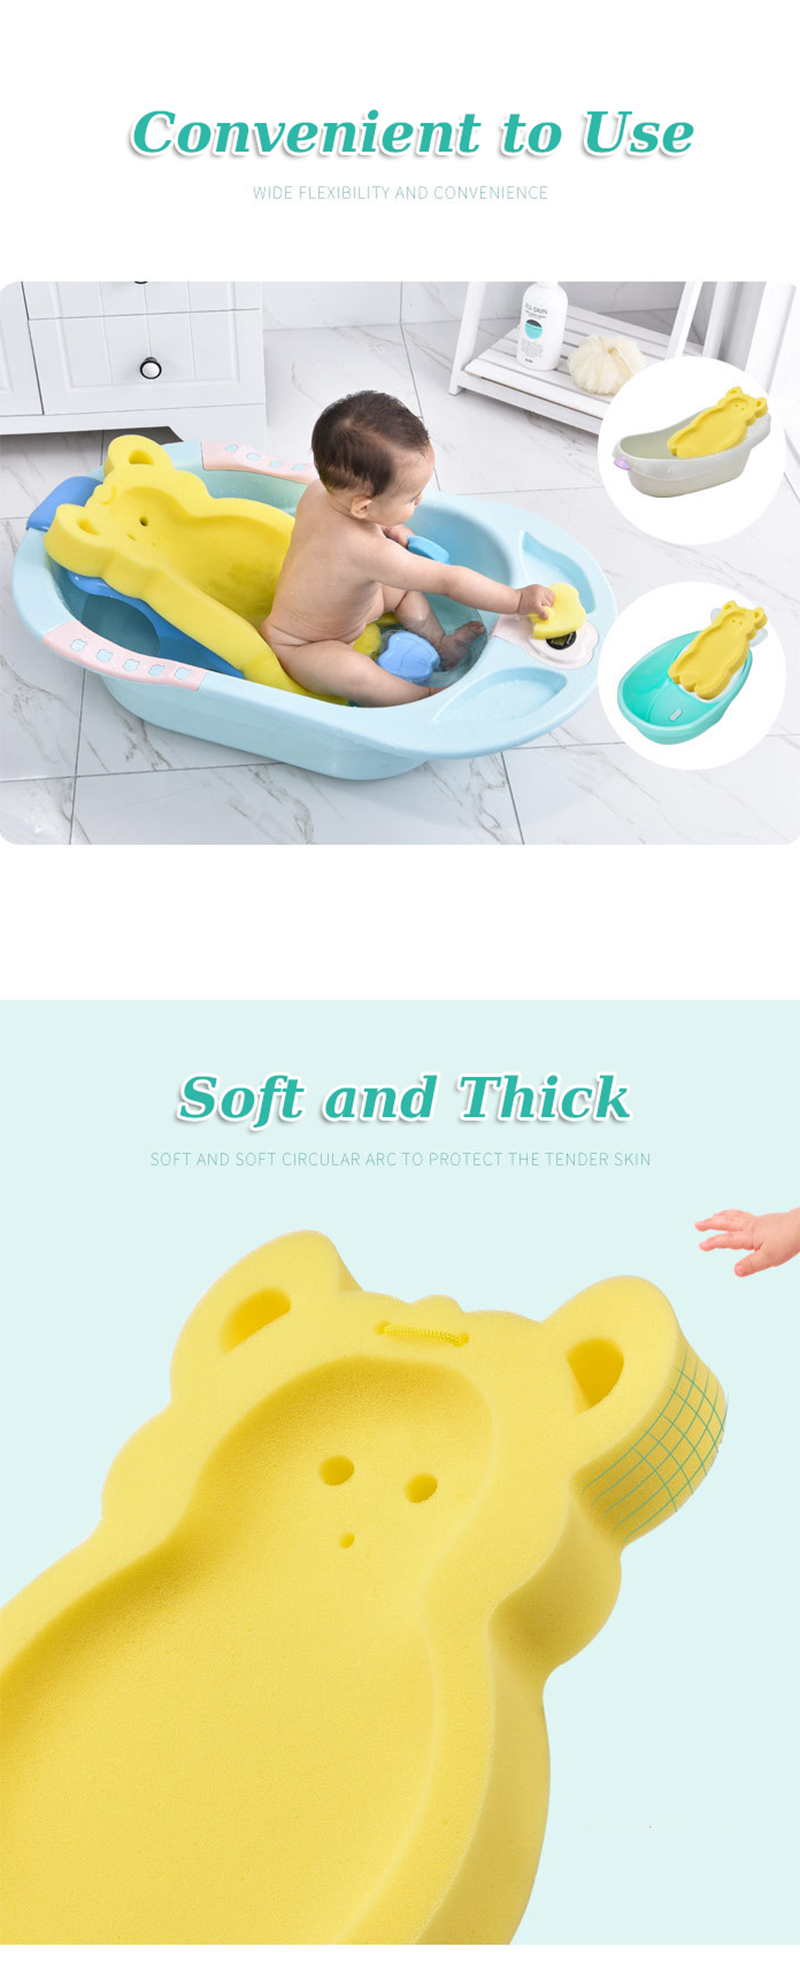  "Water-Resistant Baby Bath Tub Pad with Soft Material for Quick and Easy Cleanup."